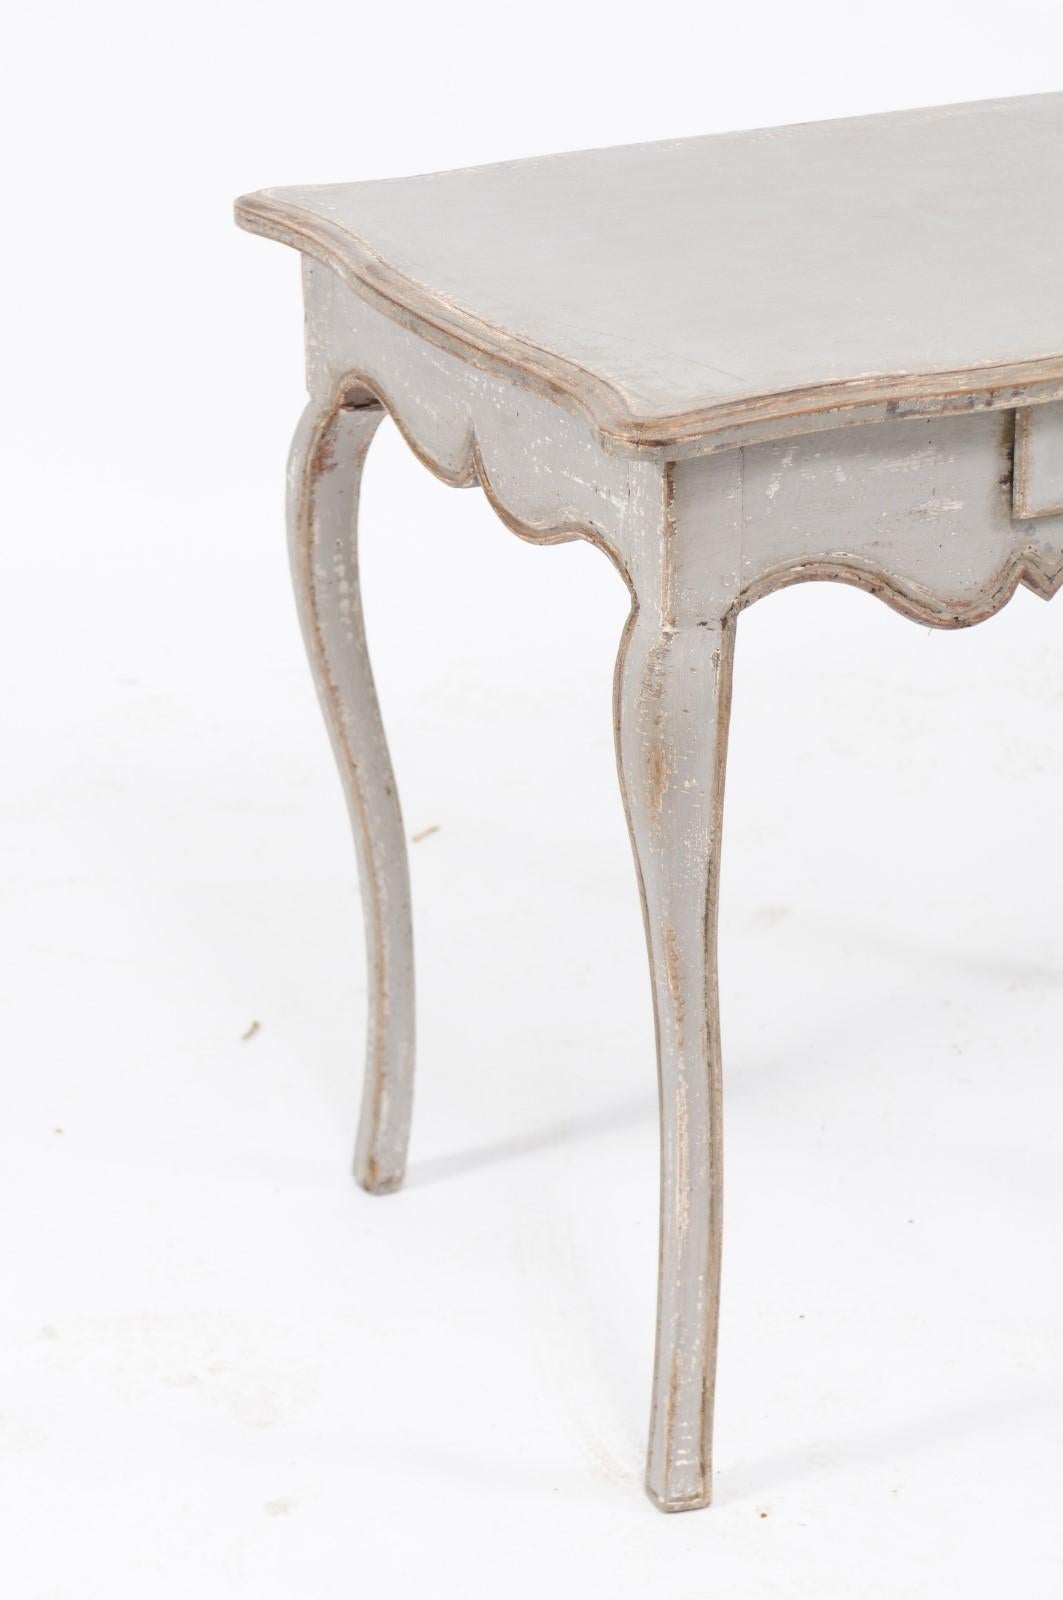 A French Louis XV style grey / silver painted pine table from the late 19th century with single drawer, cabriole legs and scalloped apron. Born in France during the last quarter of the 19th century, this pretty Louis XV style table features a